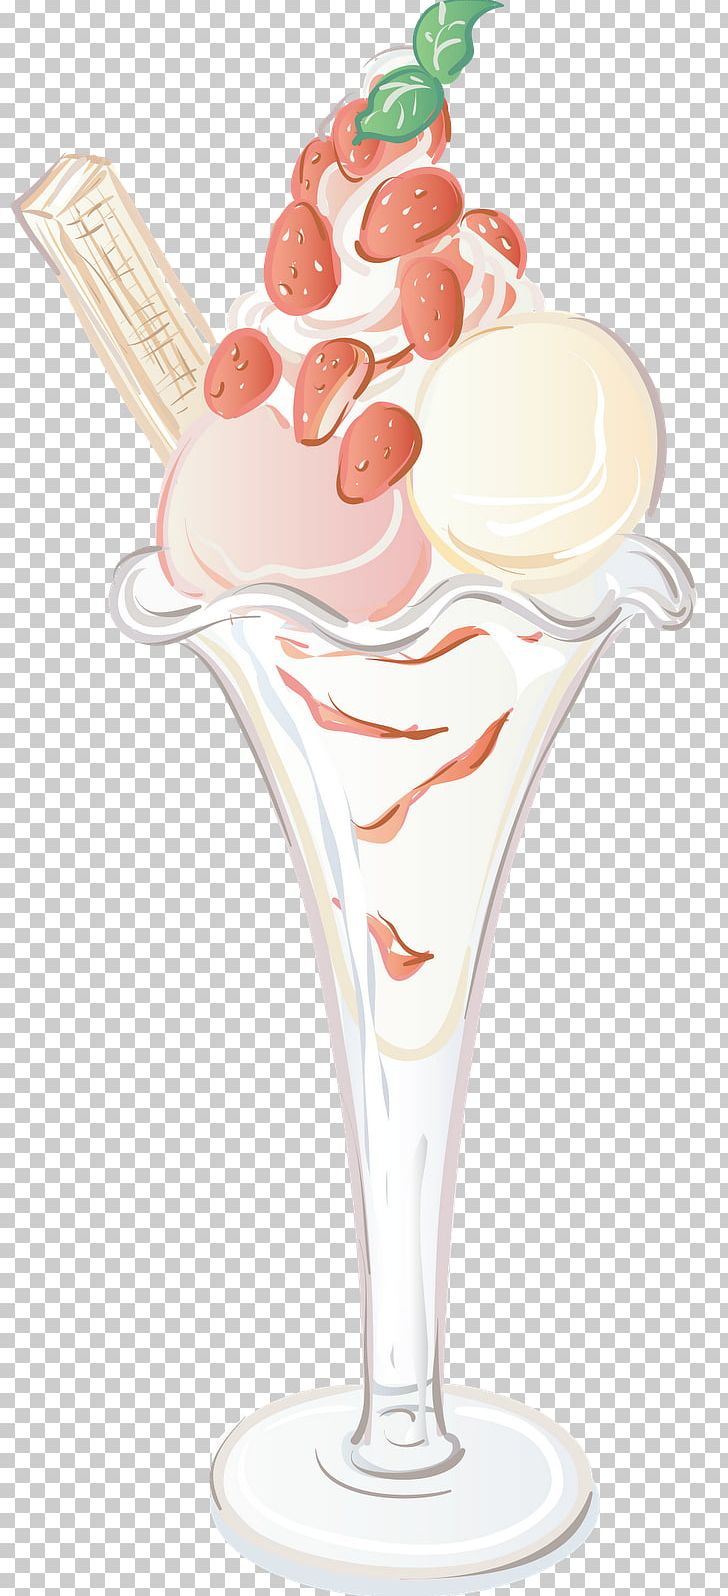 Ice Cream Cones Sundae Frozen Dessert Strawberry Ice Cream PNG, Clipart, Amorodo, Cocktail Garnish, Cream, Dairy Product, Dairy Products Free PNG Download